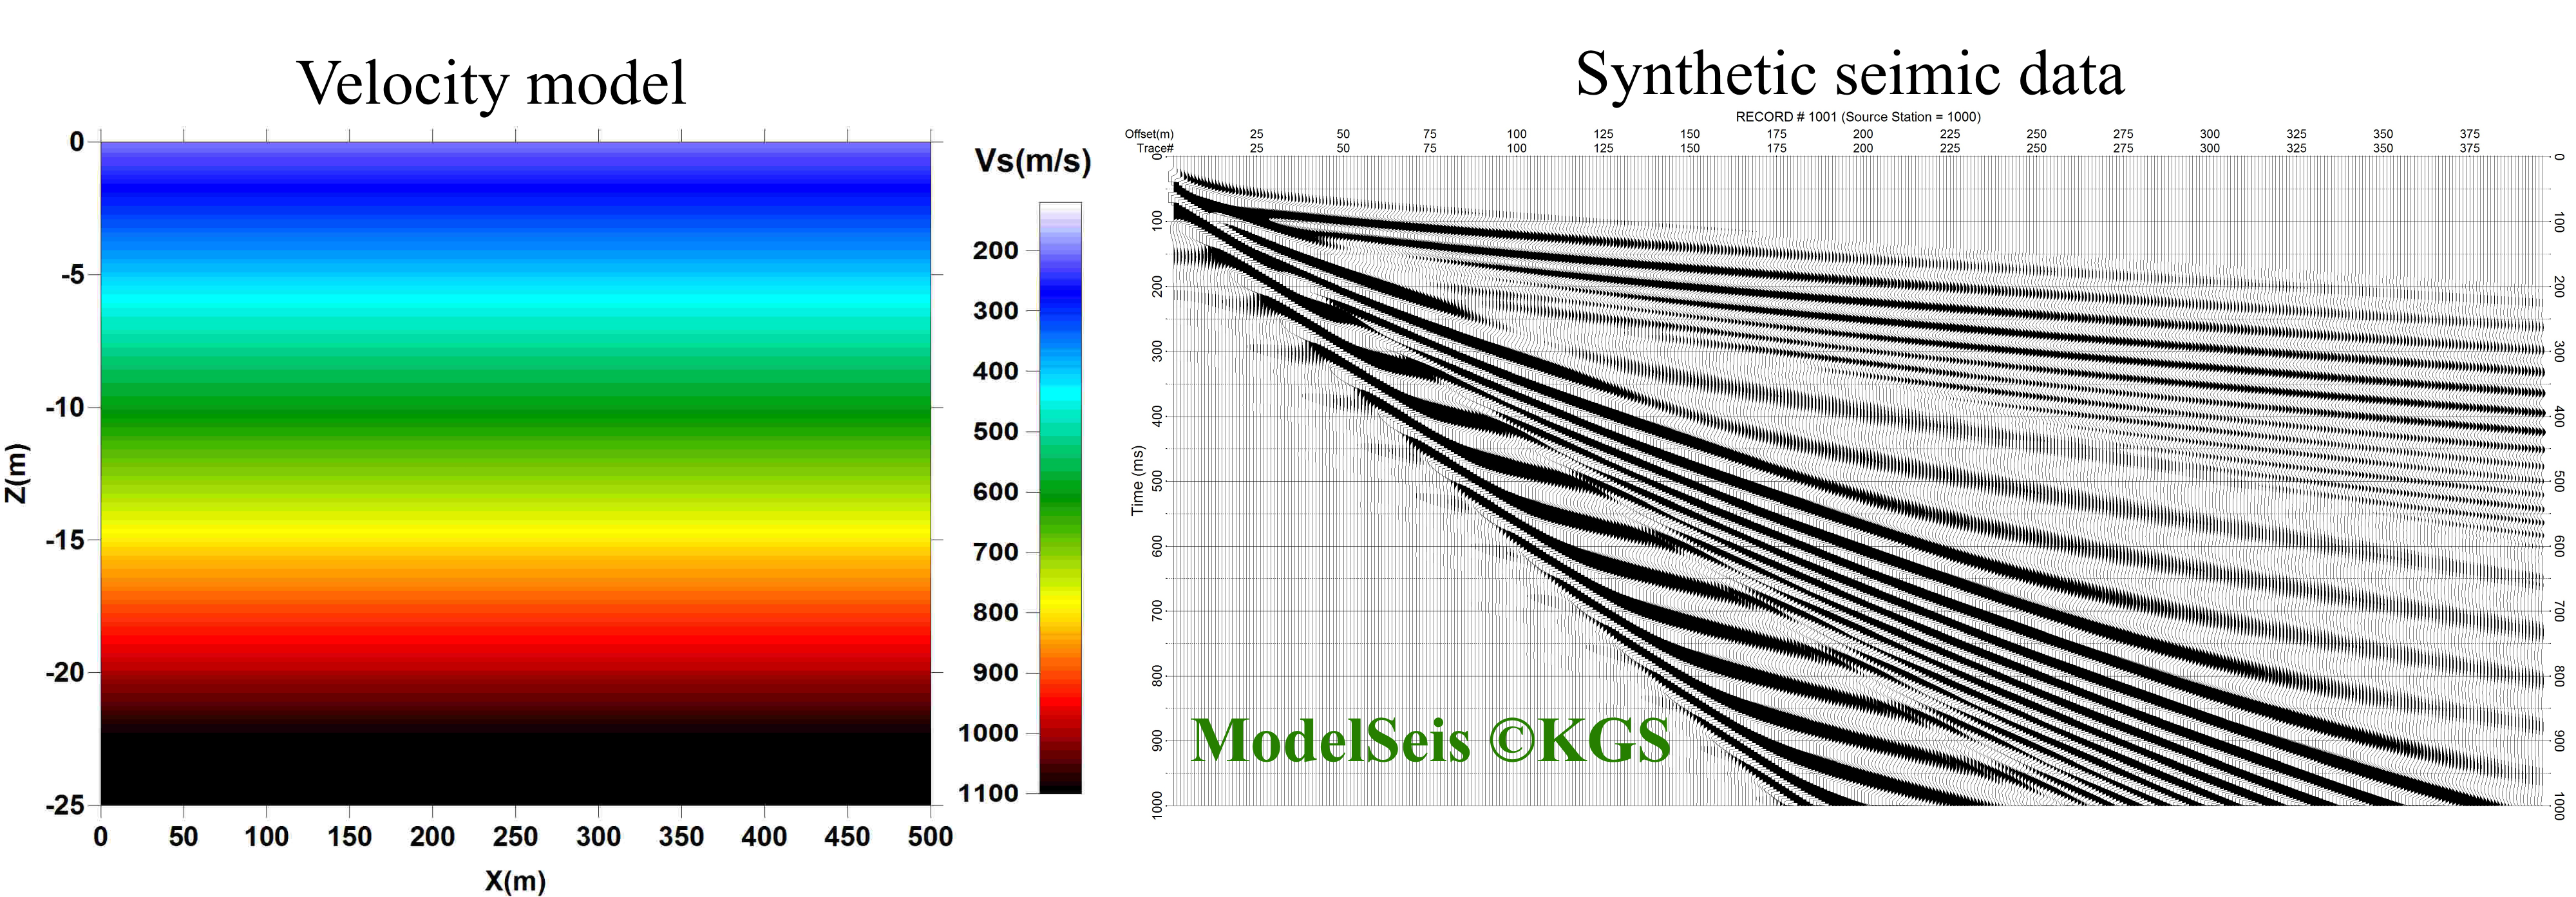 Velocity model and synthetic seismic data